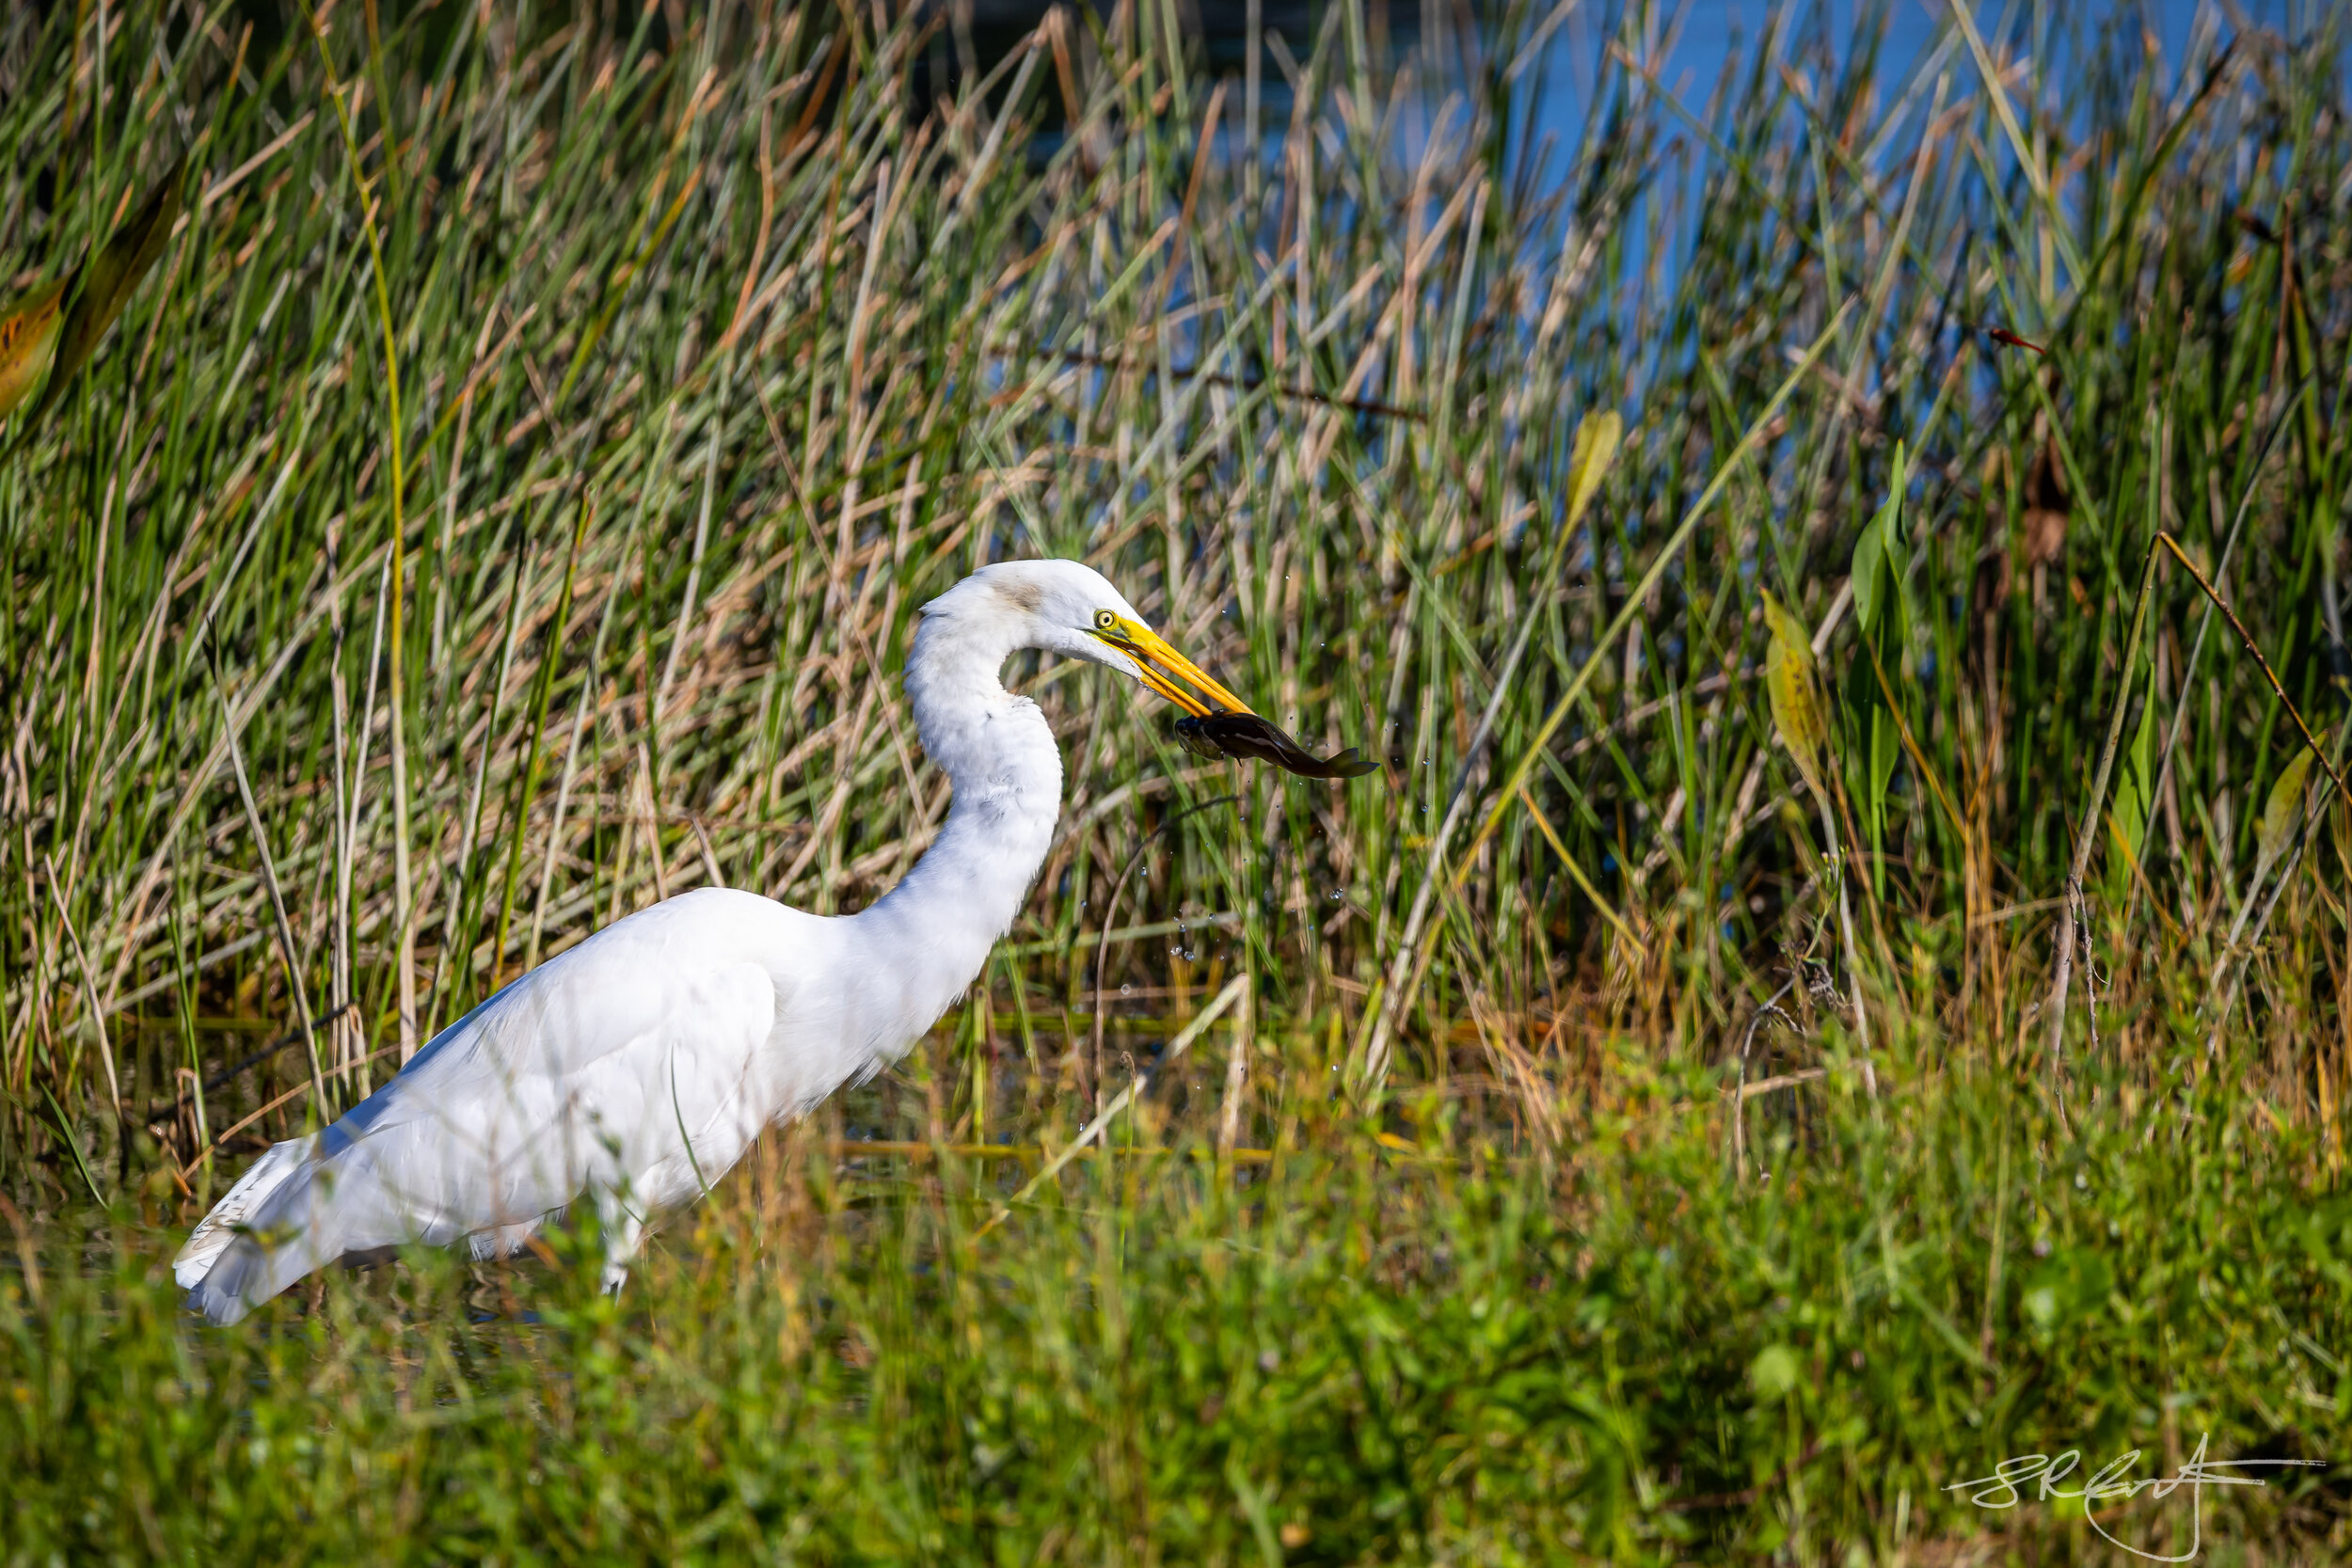 Great Egret has a nicer day than the fish did.